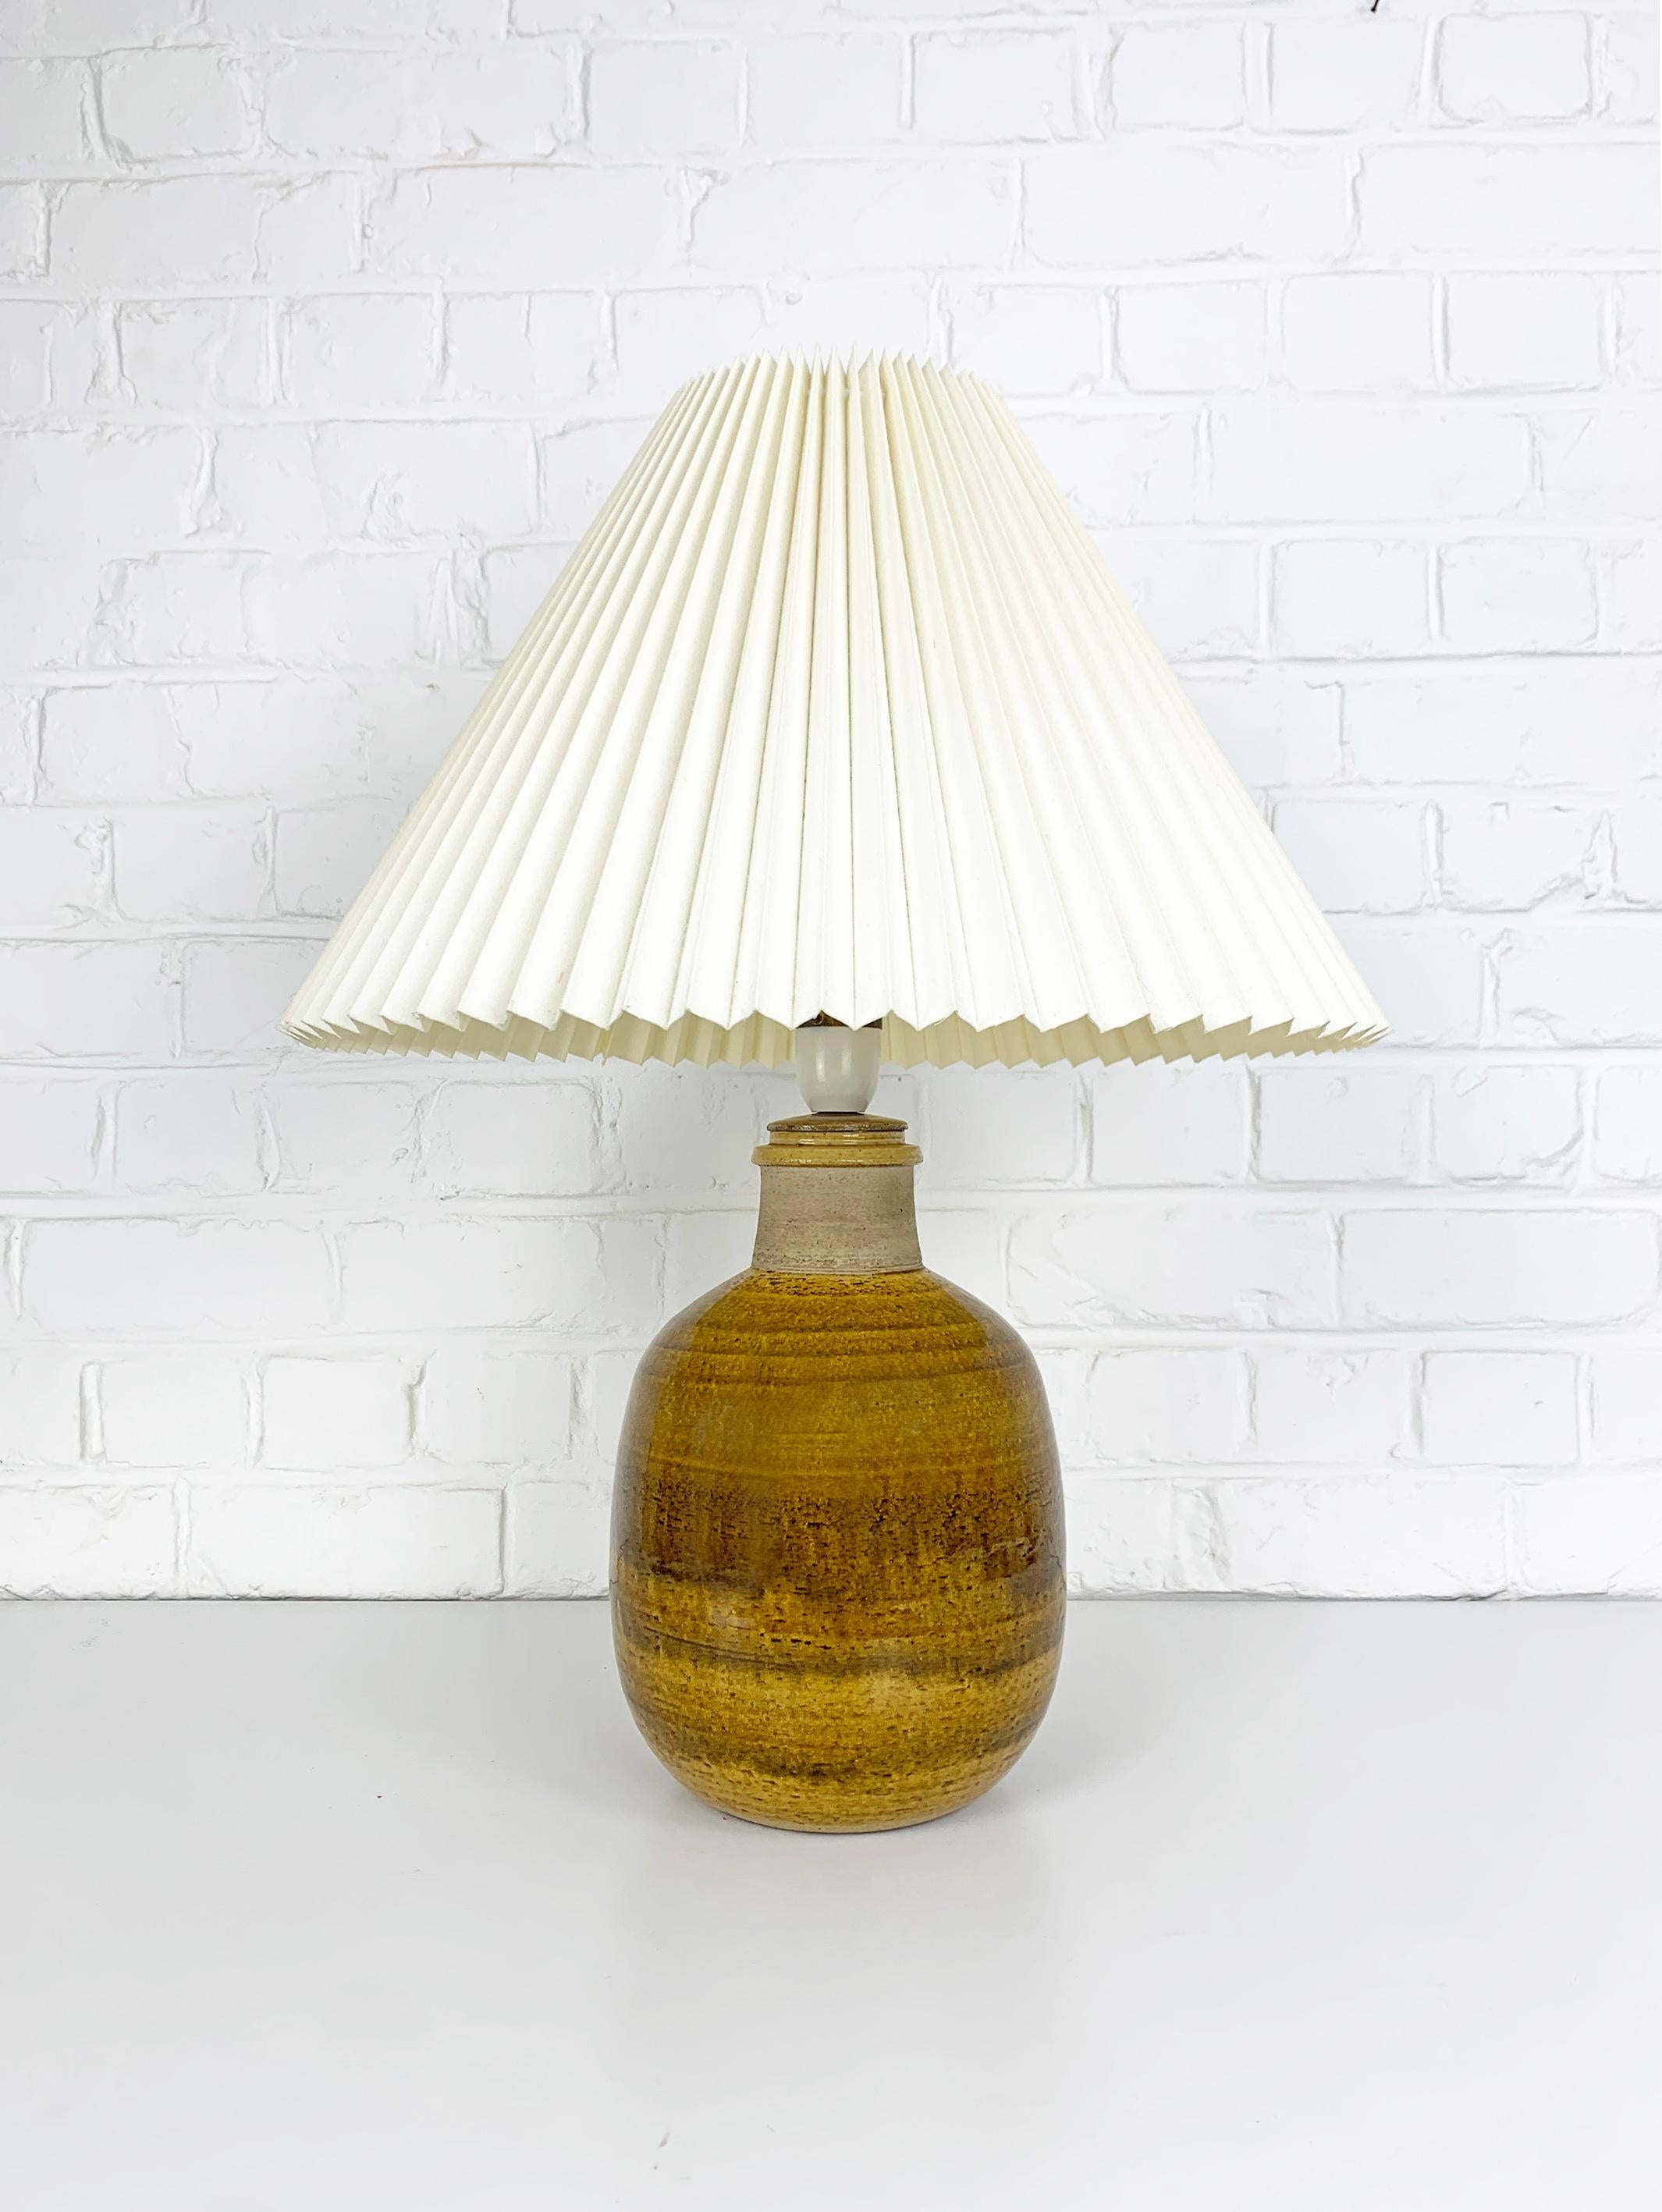 Stoneware table lamp in uranium yellow / beige / ocre glaze and natural stoneware finish. Designed by Nils Kähler in the 1960s or 1970s. 

Manufactured in the workshop of Herman A. Kähler Ceramic (HAK) in the town of Naestved in southern